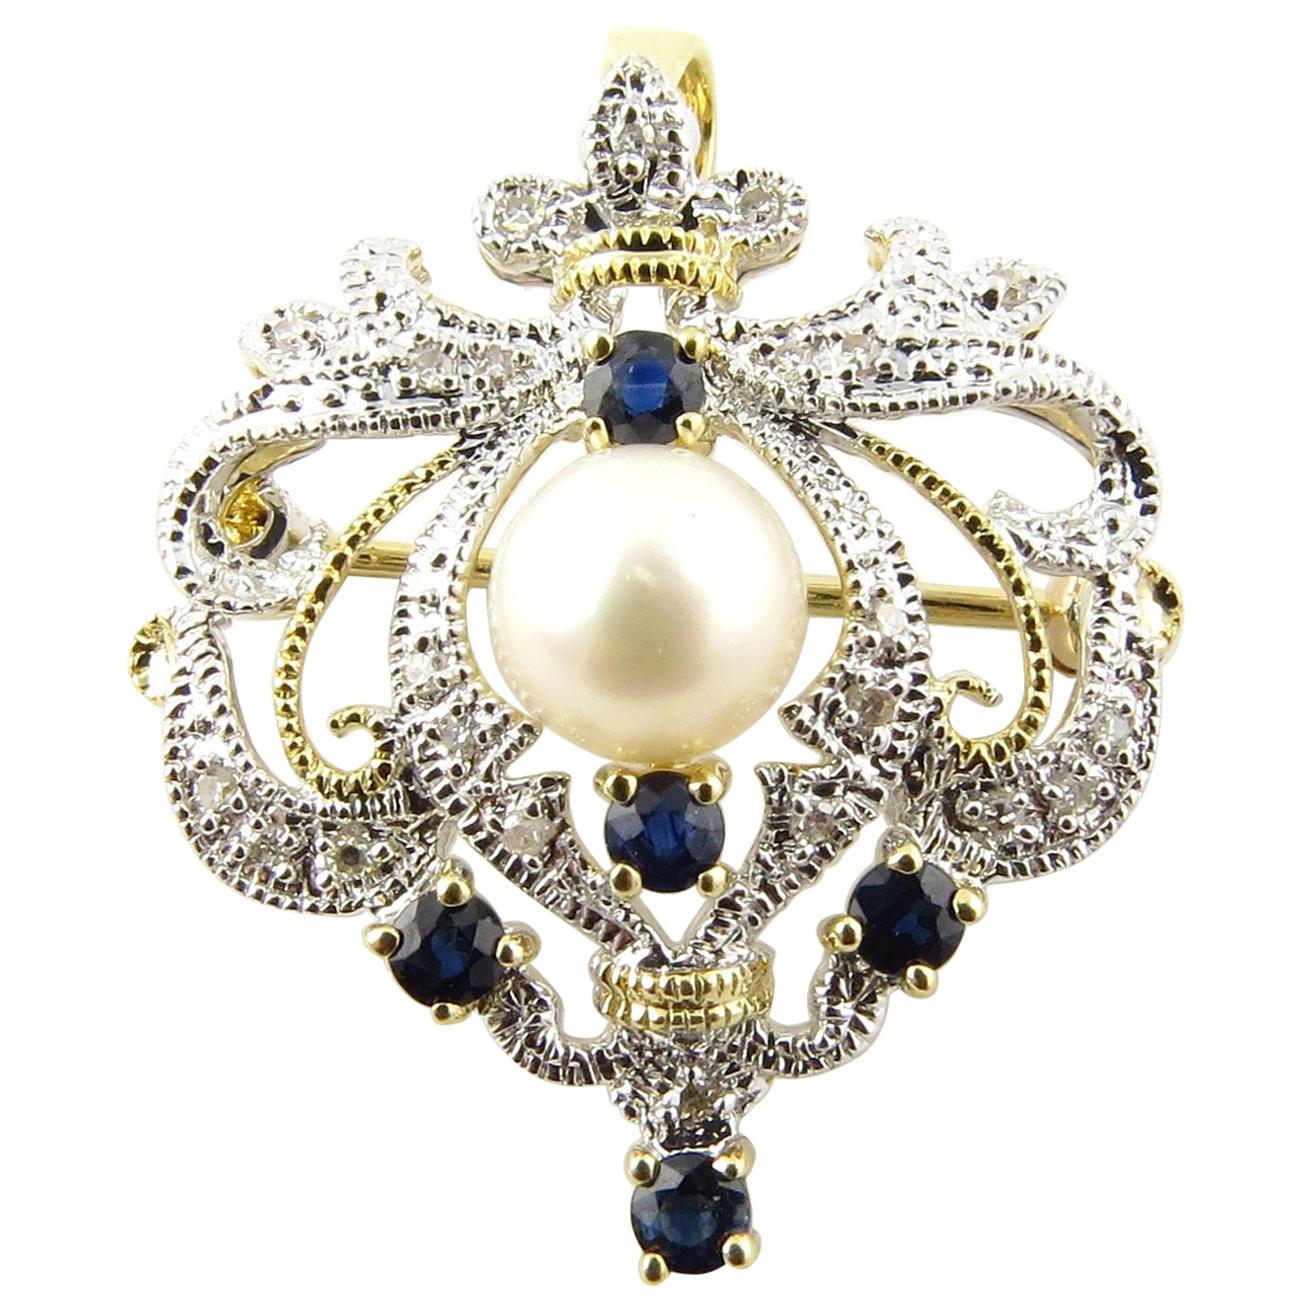 14 Karat White and Yellow Gold Diamond, Sapphire and Pearl Brooch or Pendant